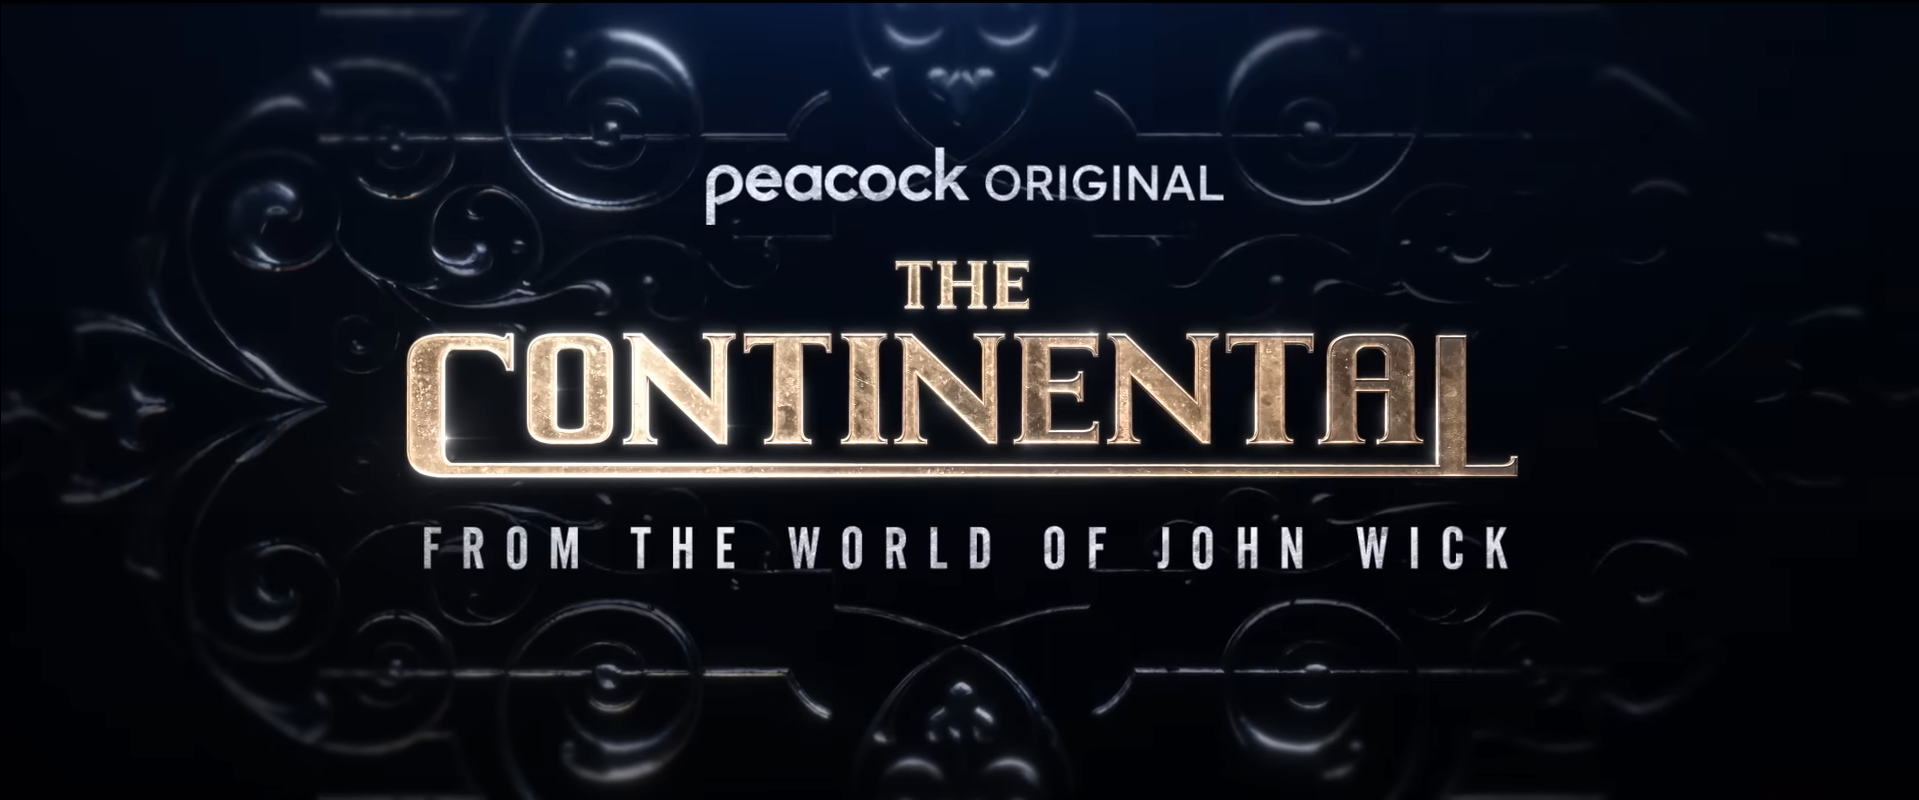 the continental trailer